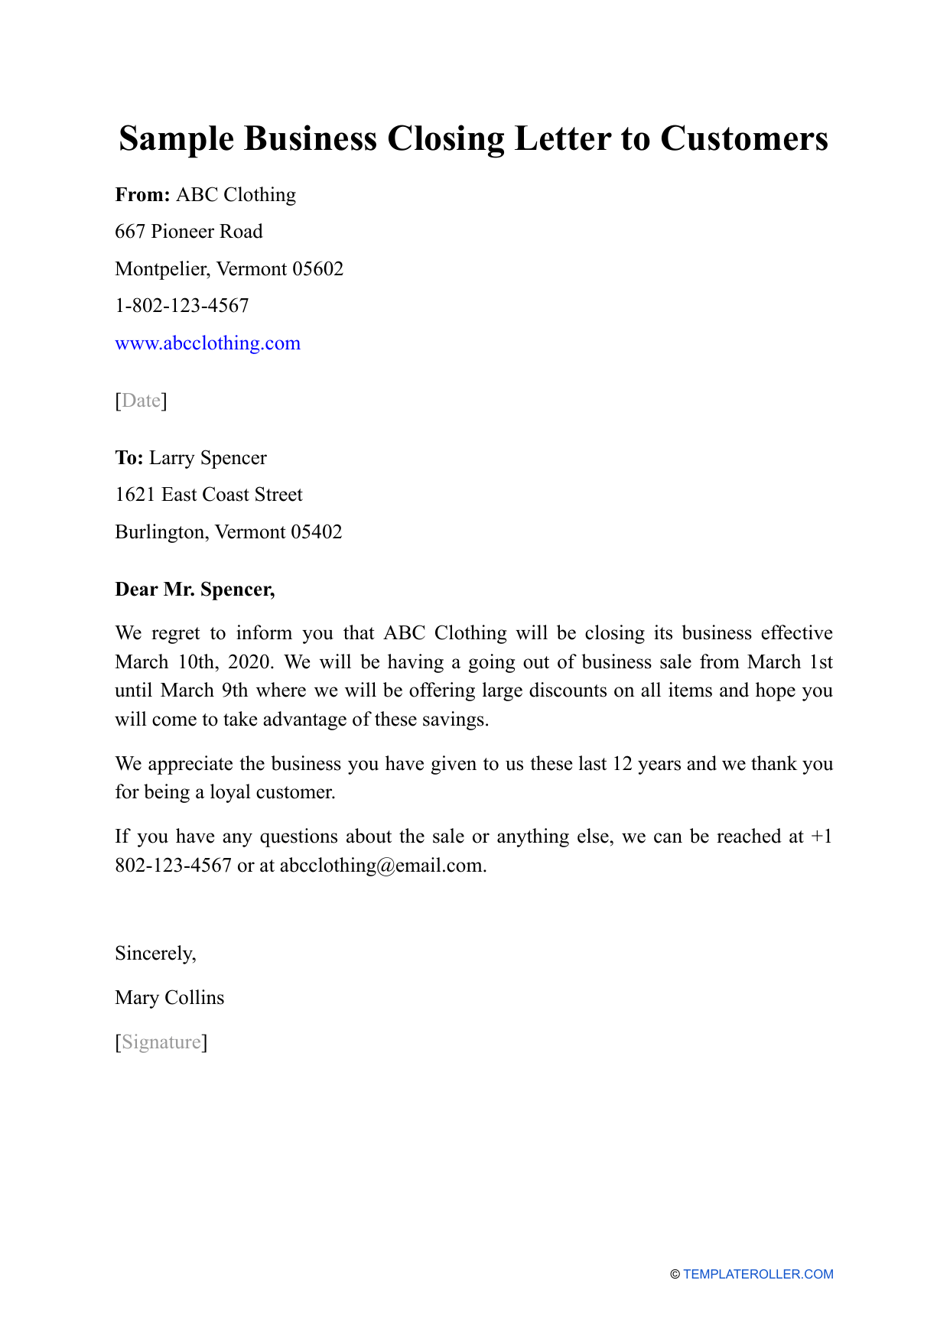 Sample Business Closing Letter To